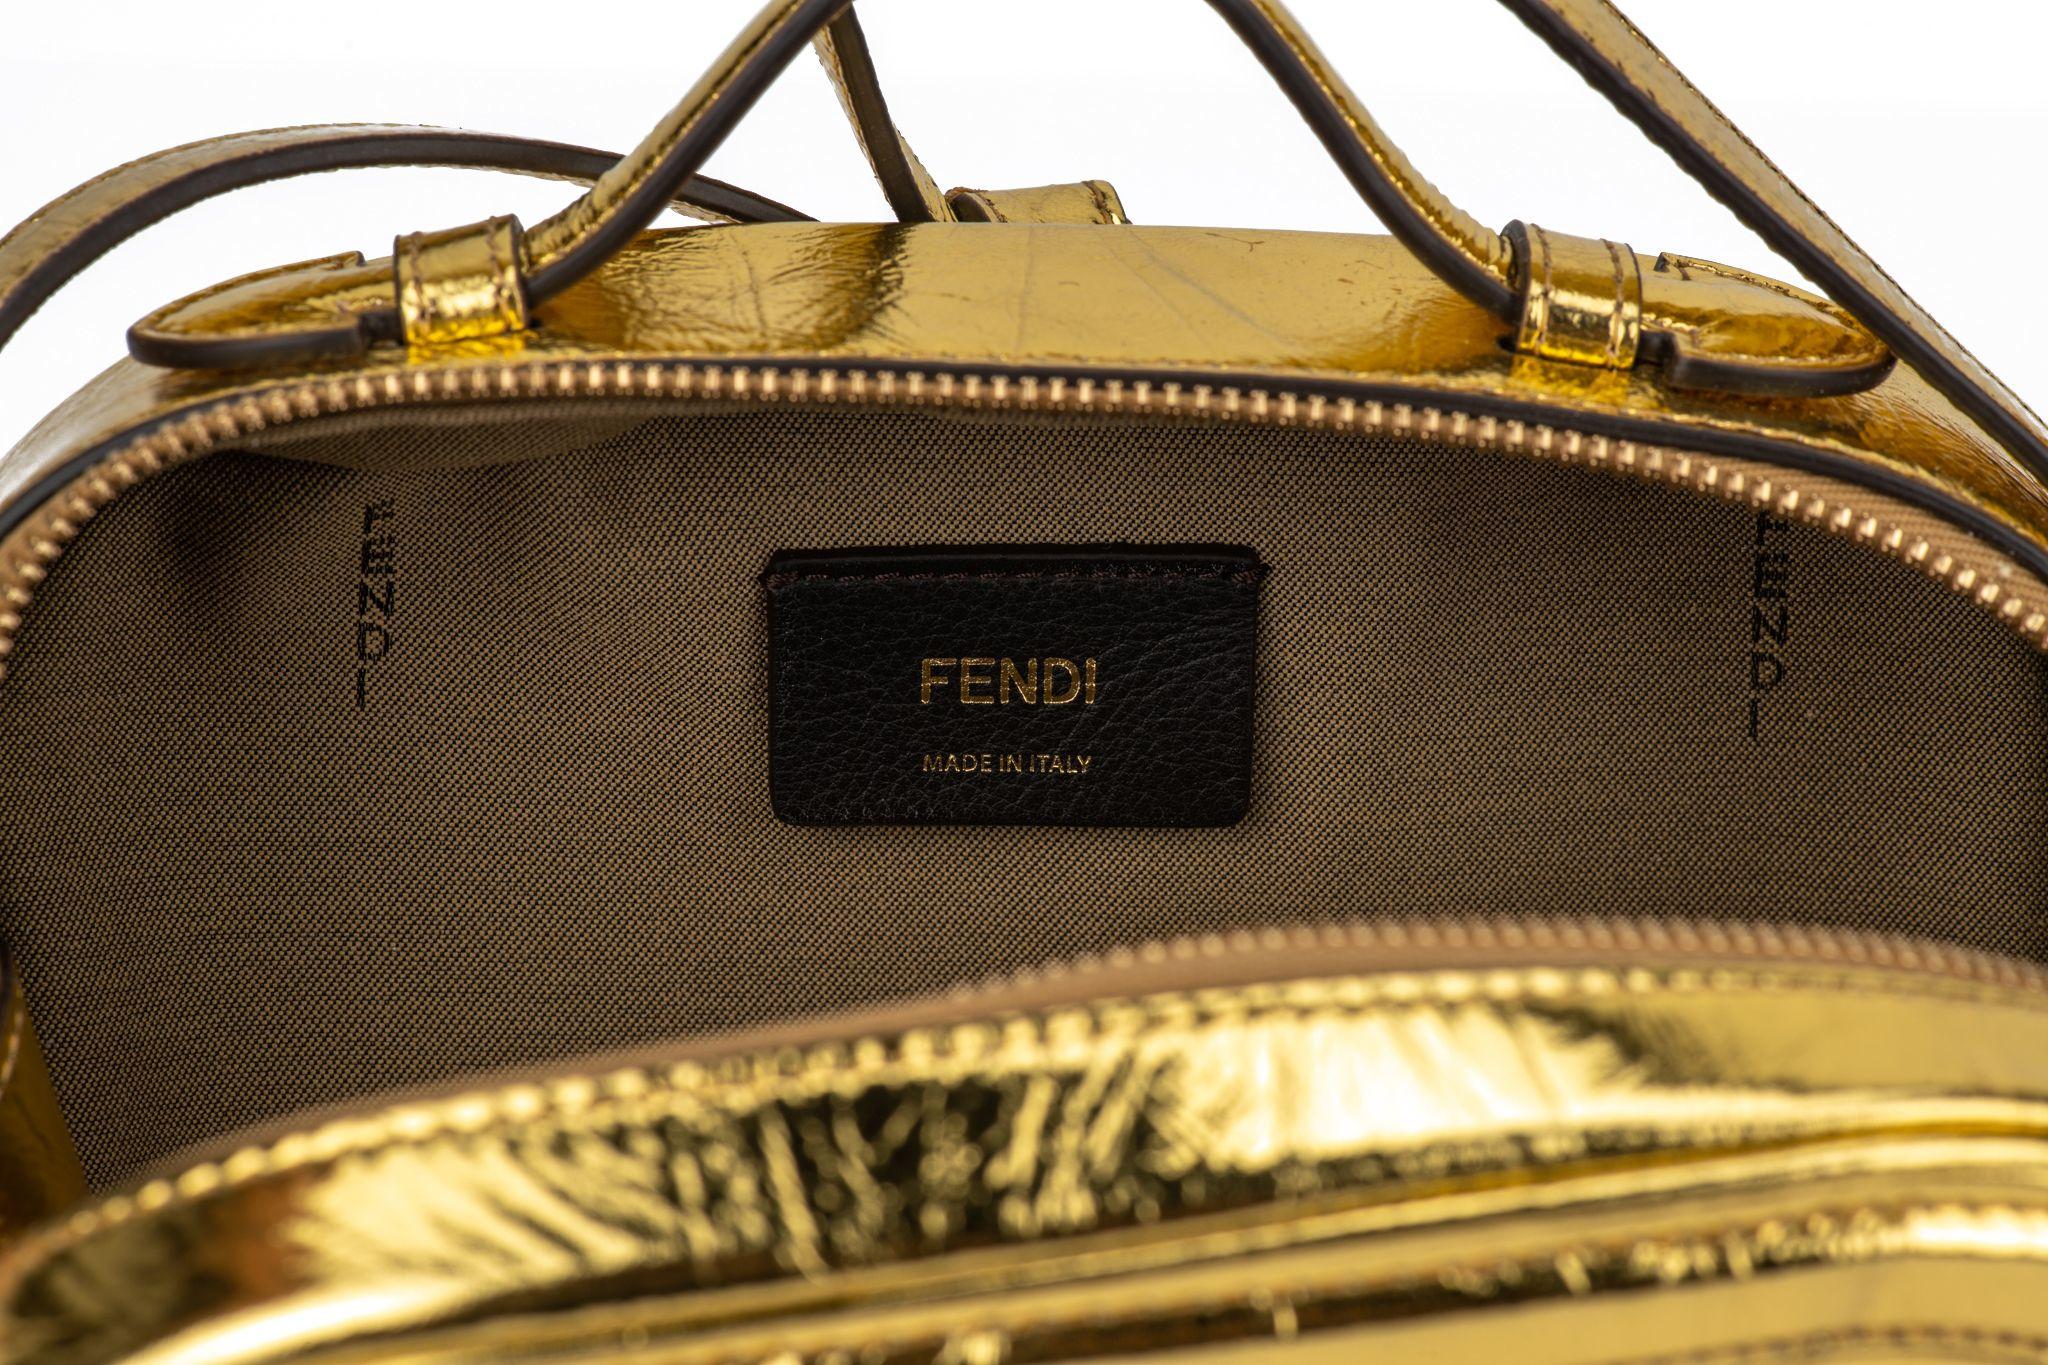 Fendi oval mini bag in gold laminated leather. Zip fastening with double slider. Outer back pocket. Featuring a lined internal compartment and gold-finish metalware. Handle drop 1.5”, detachable strap 18.5”. The bag is new and comes with the